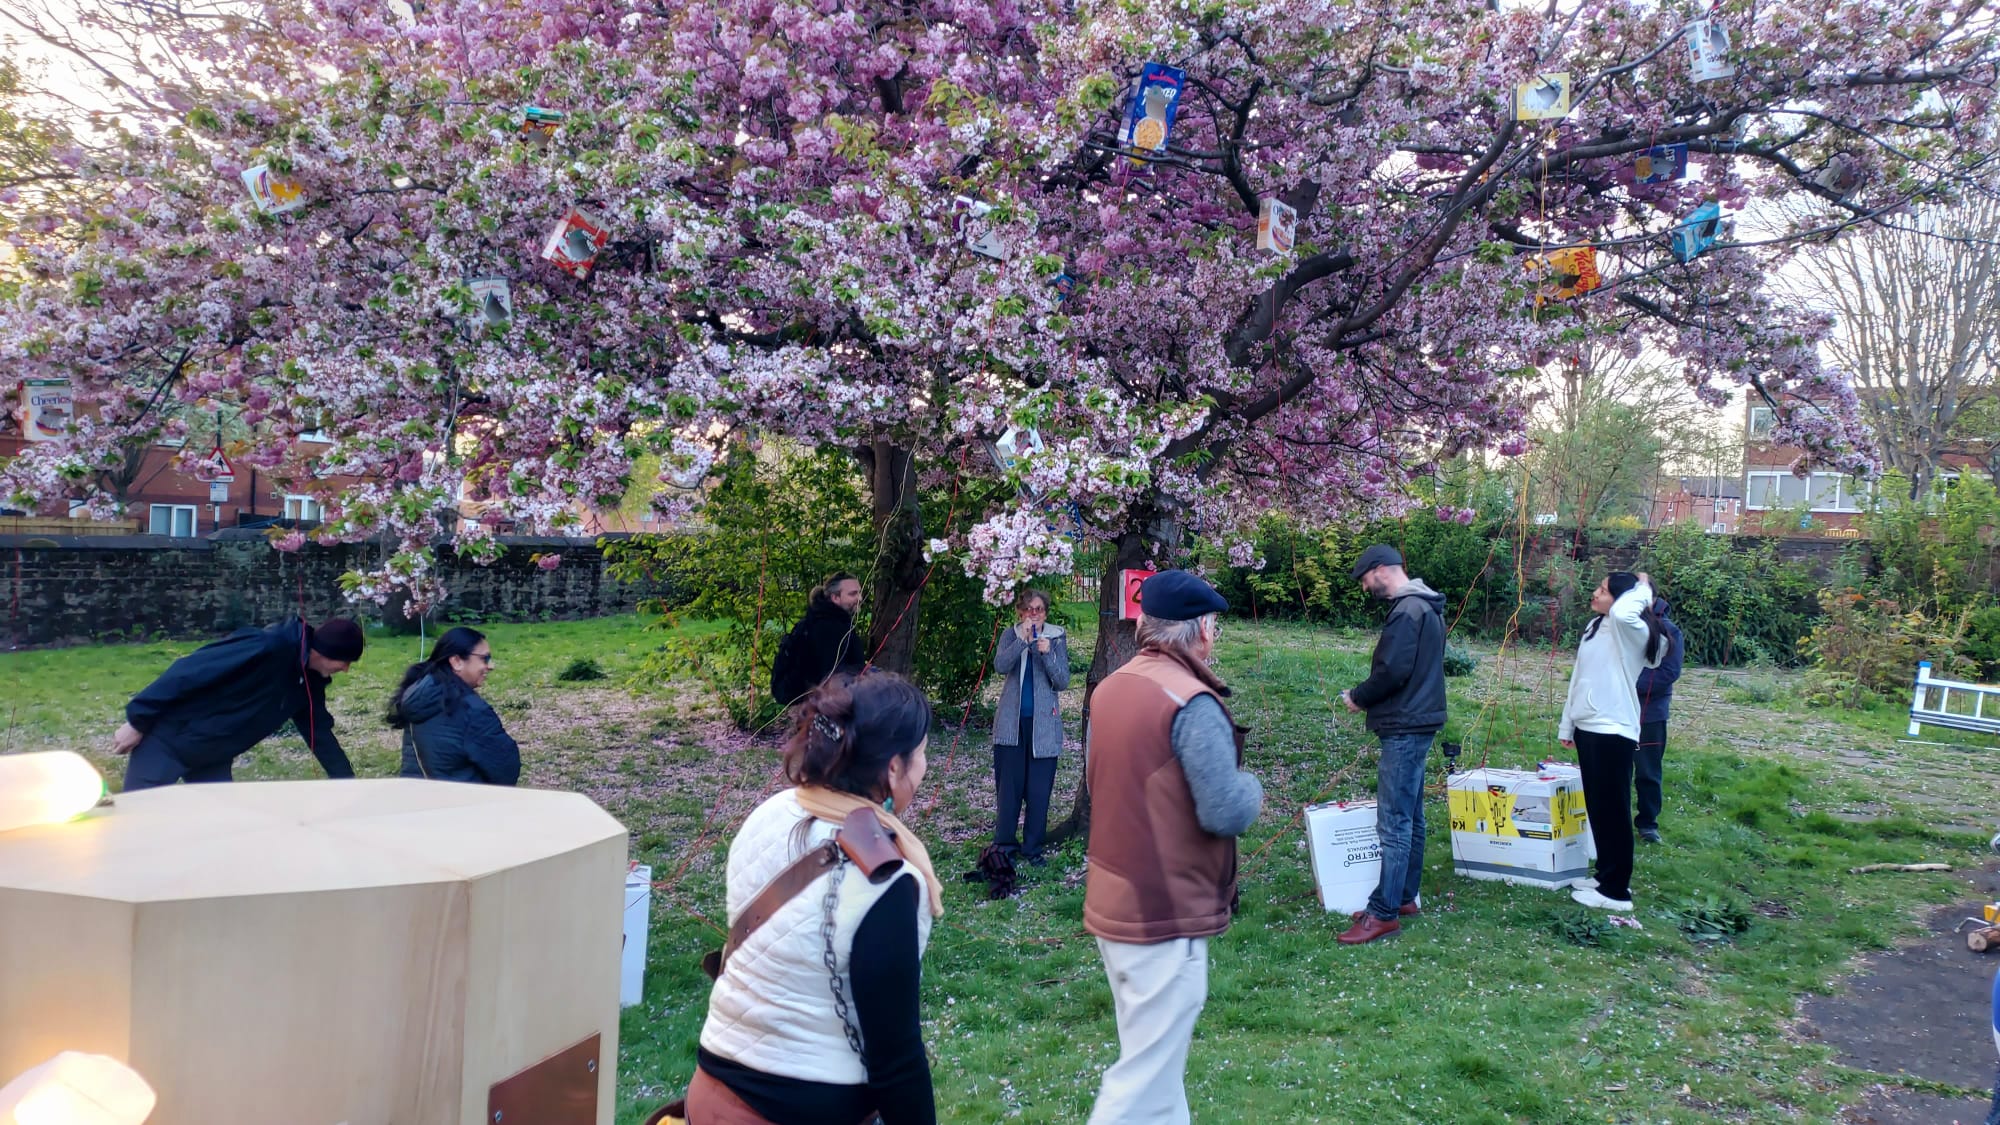 people standing around the blossom trees with lit up bird boxes in amongst the blossoms. Rachel and Frank and Future Machine in the foreground